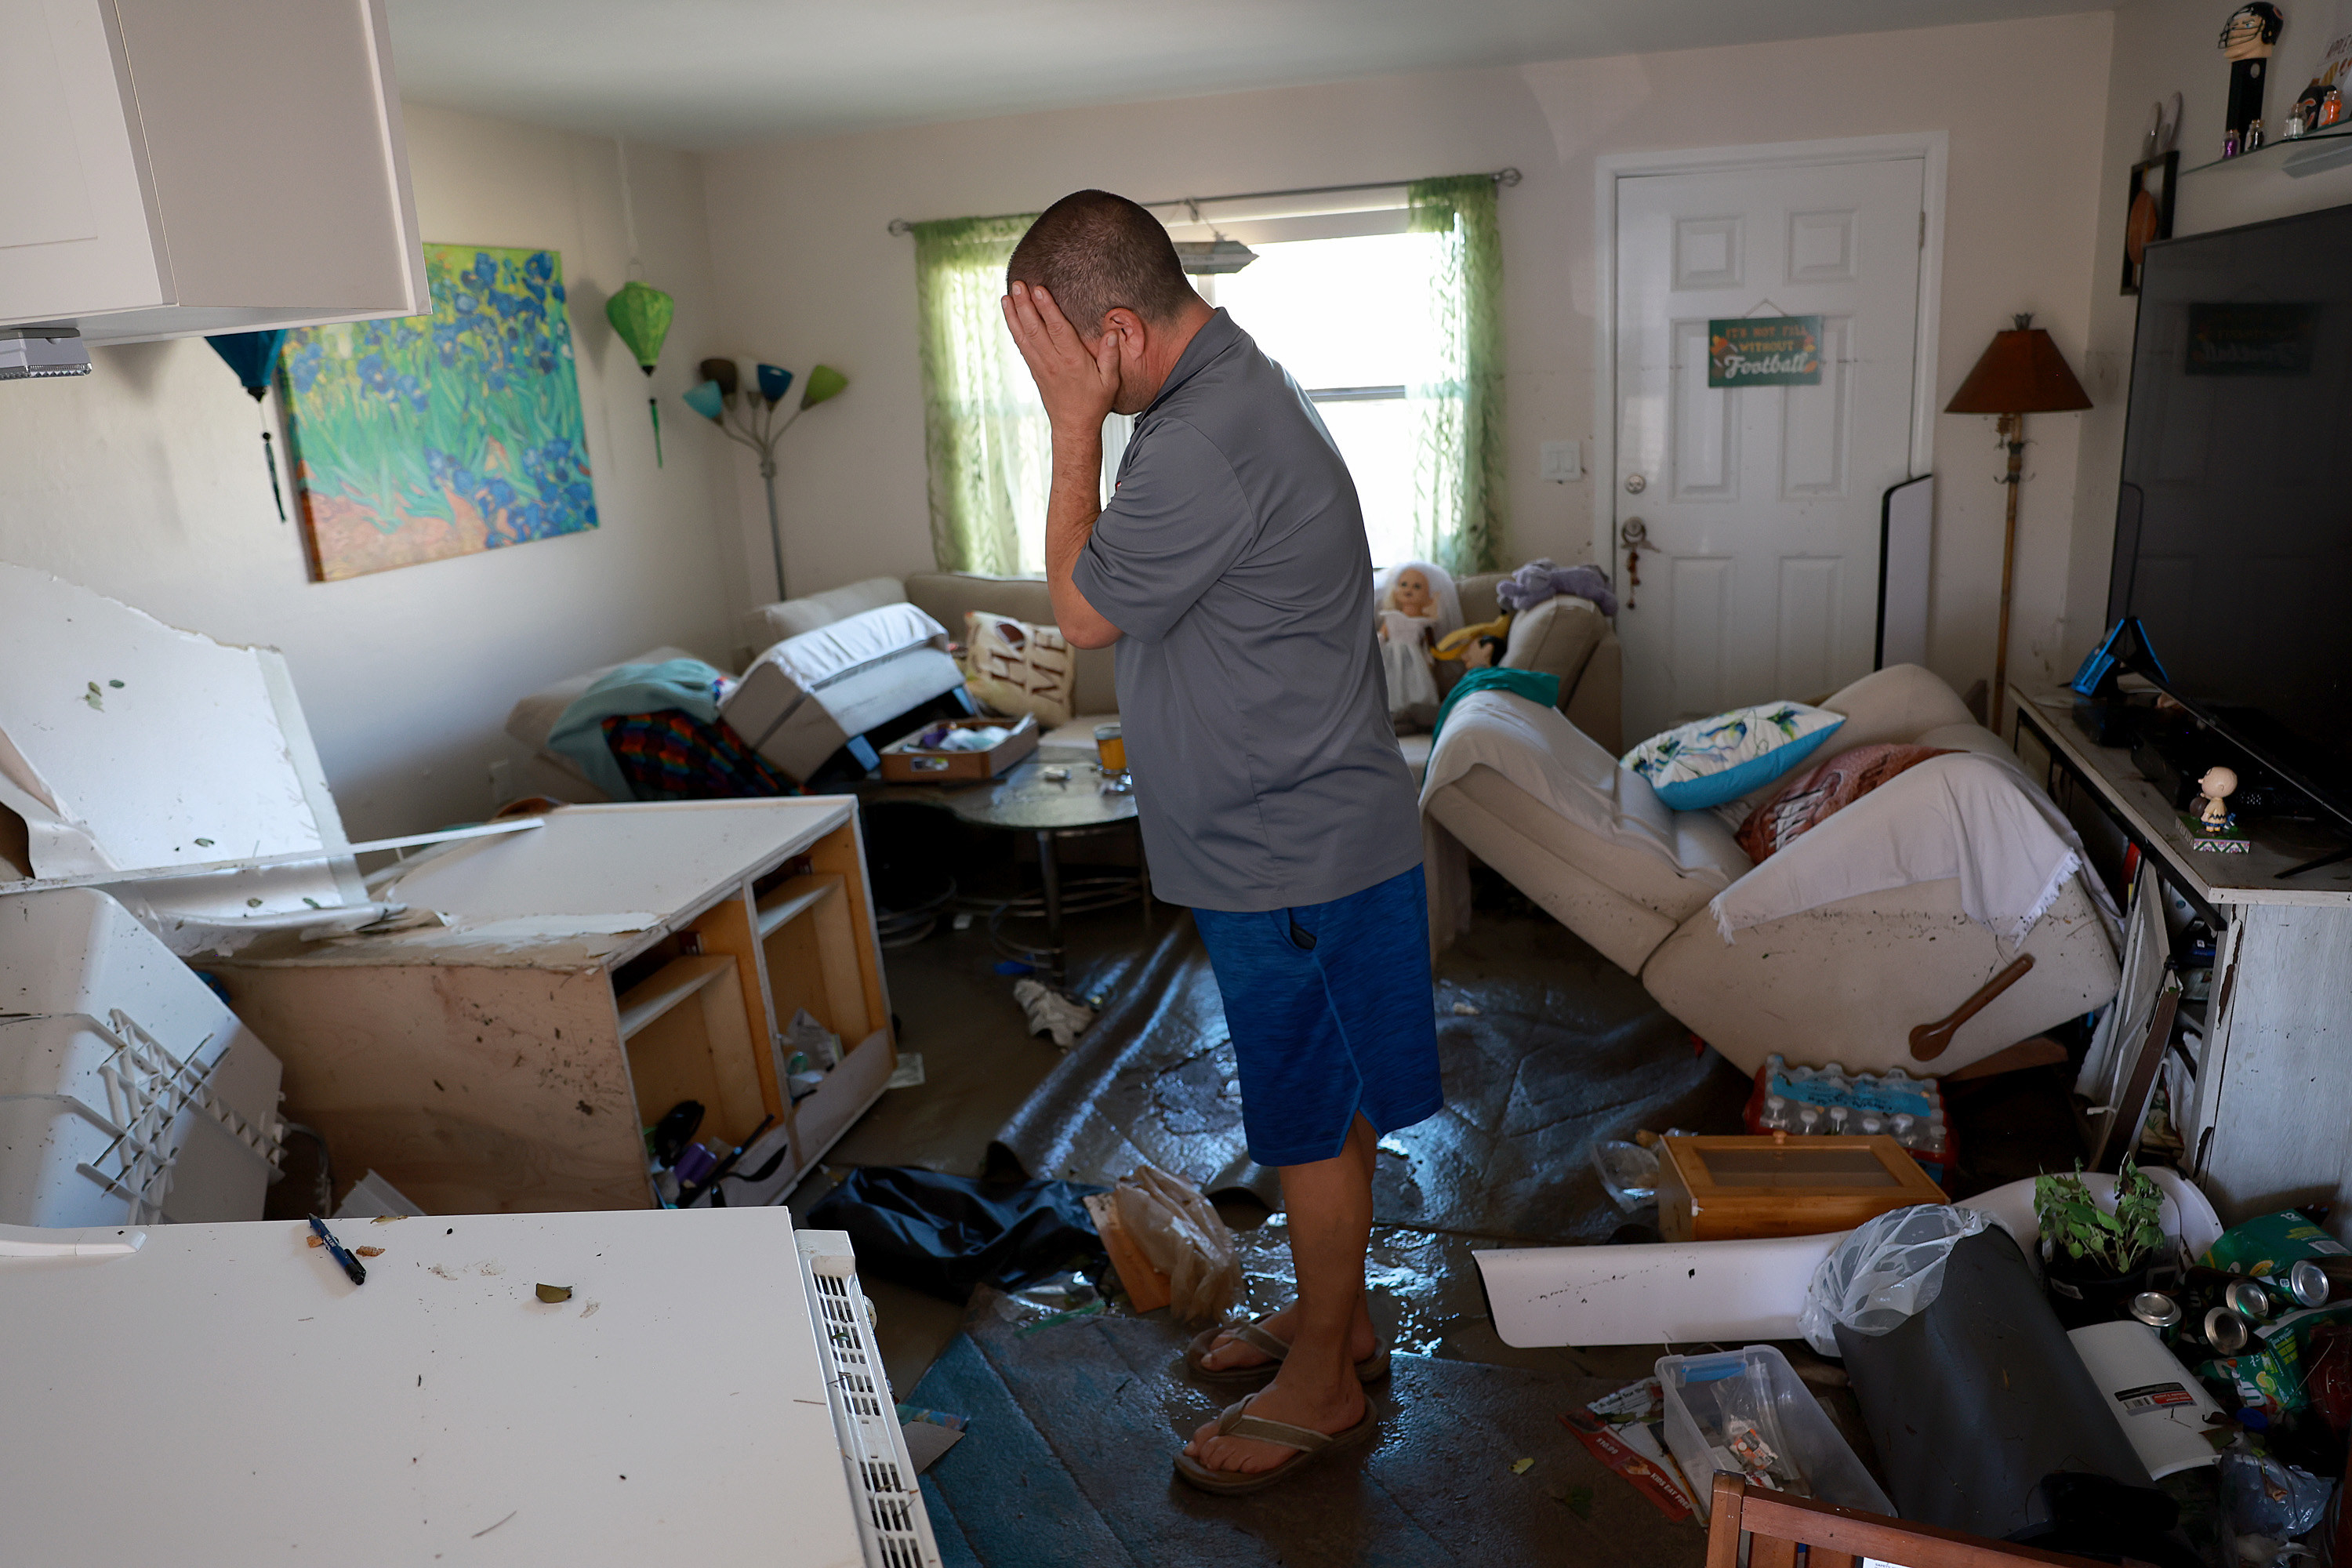 A man wearing a gray shirt, blue shorts, flip flops stands in a cluttered, destroyed living room and holds his head in his hands and cries